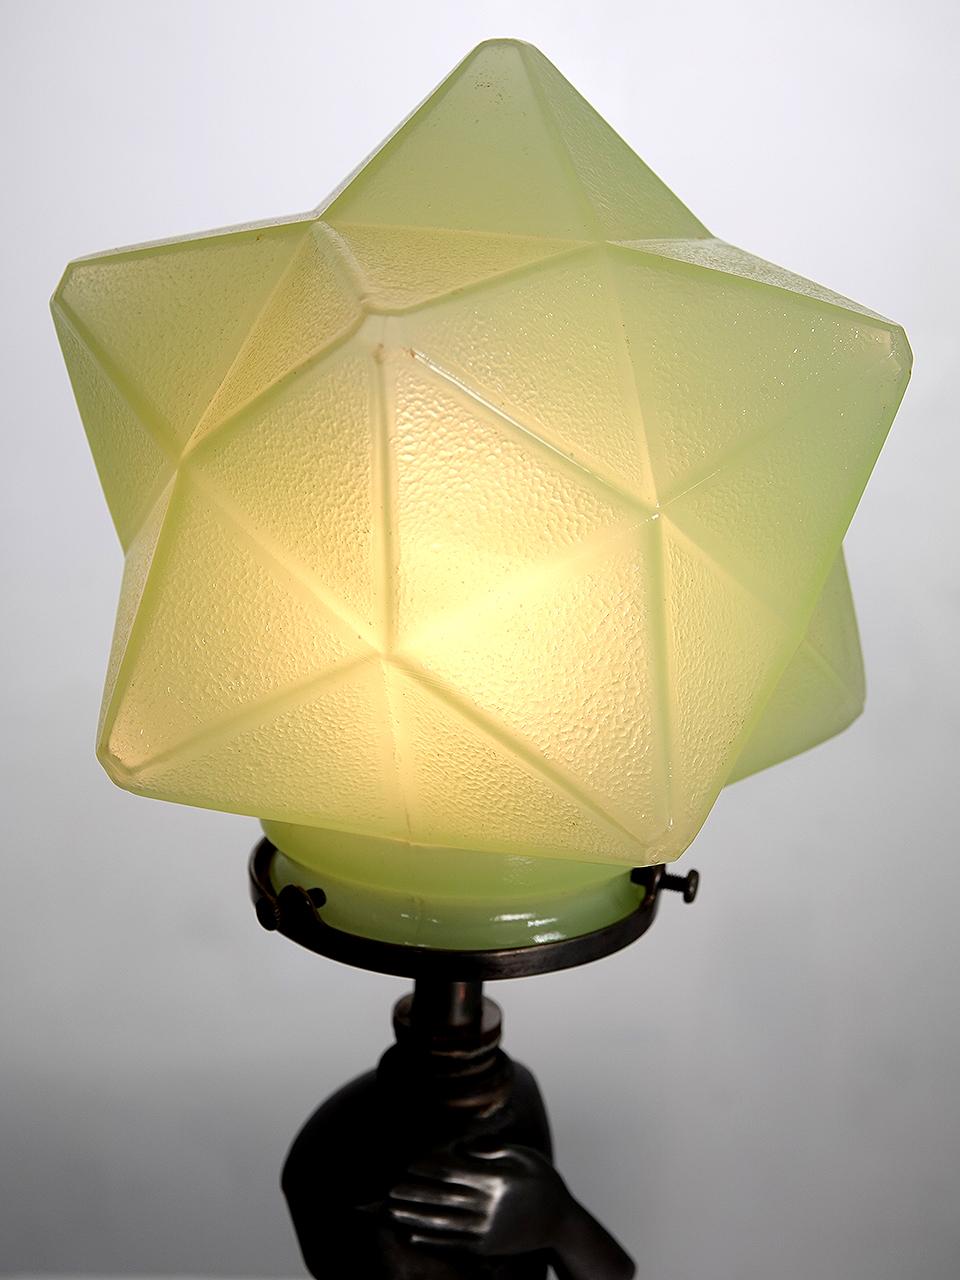 Its rare that you find a matching pair of Deco lamps. These have a Hollywood Deco feel that is quite unique. The shades area multi-sided starburst in a mint green art glass. It may also be Uranium Glass... but not sure. The base is a dark cast metal